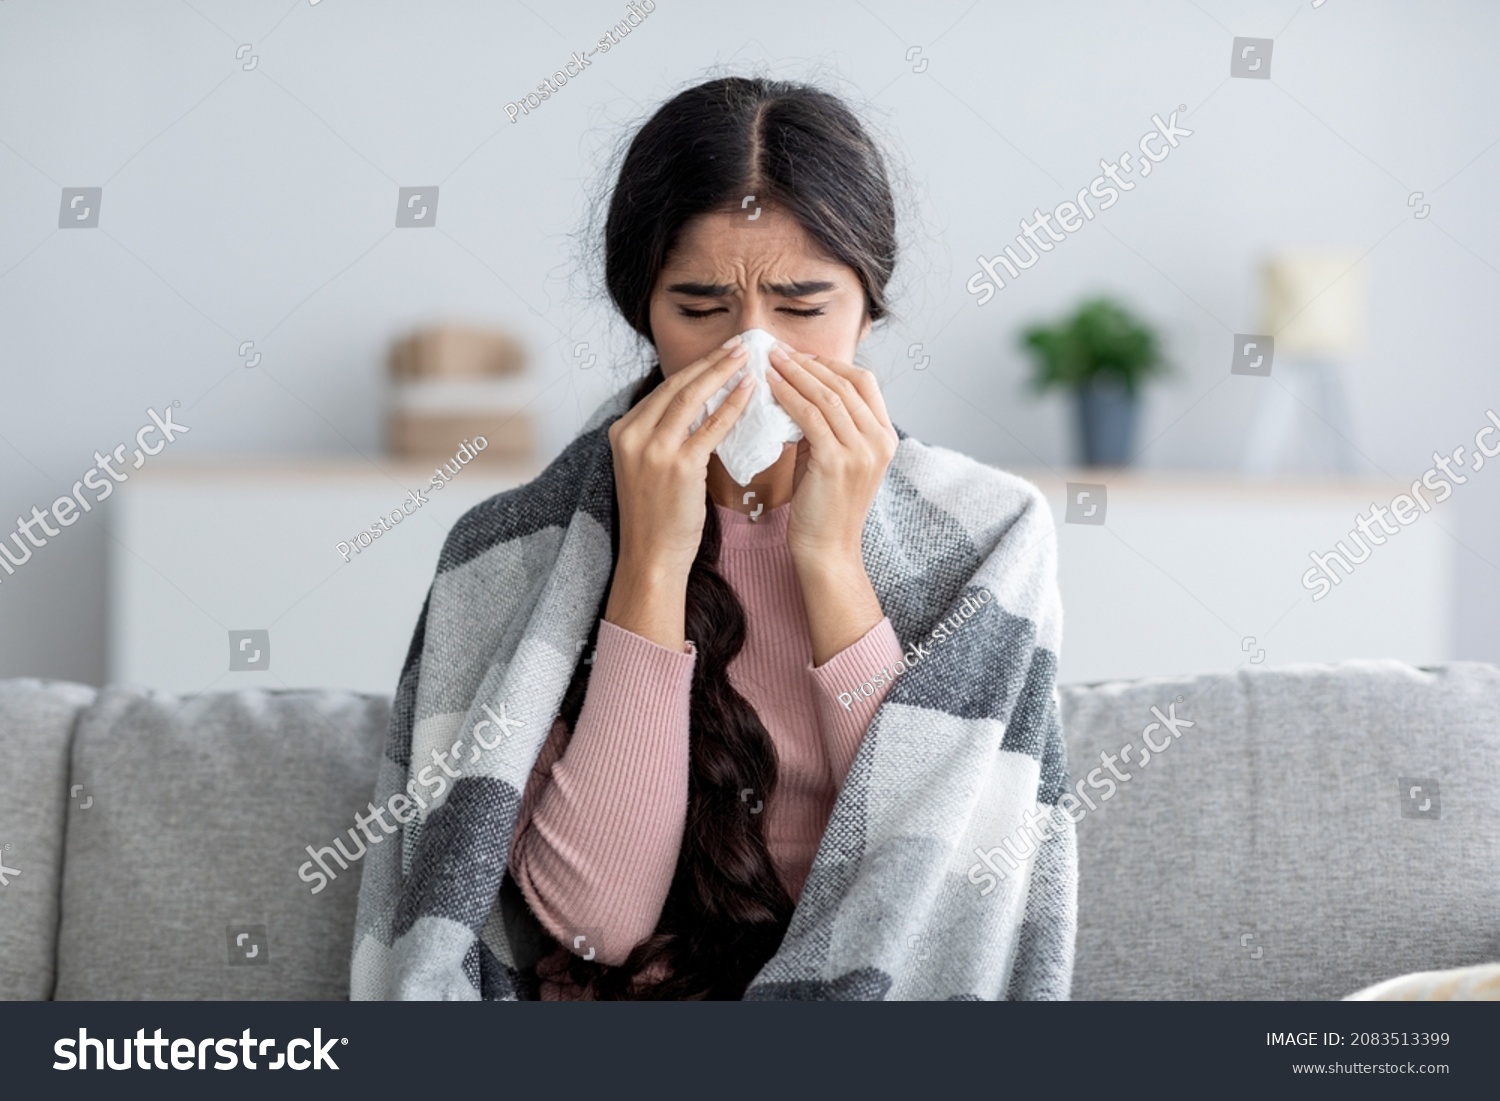 Unhappy sad young indian female in plaid suffering from fever and flu on sofa, blowing nose in napkin in living room interior. Covid-19 lockdown, treatment of illness, cold and runny, copy space #2083513399